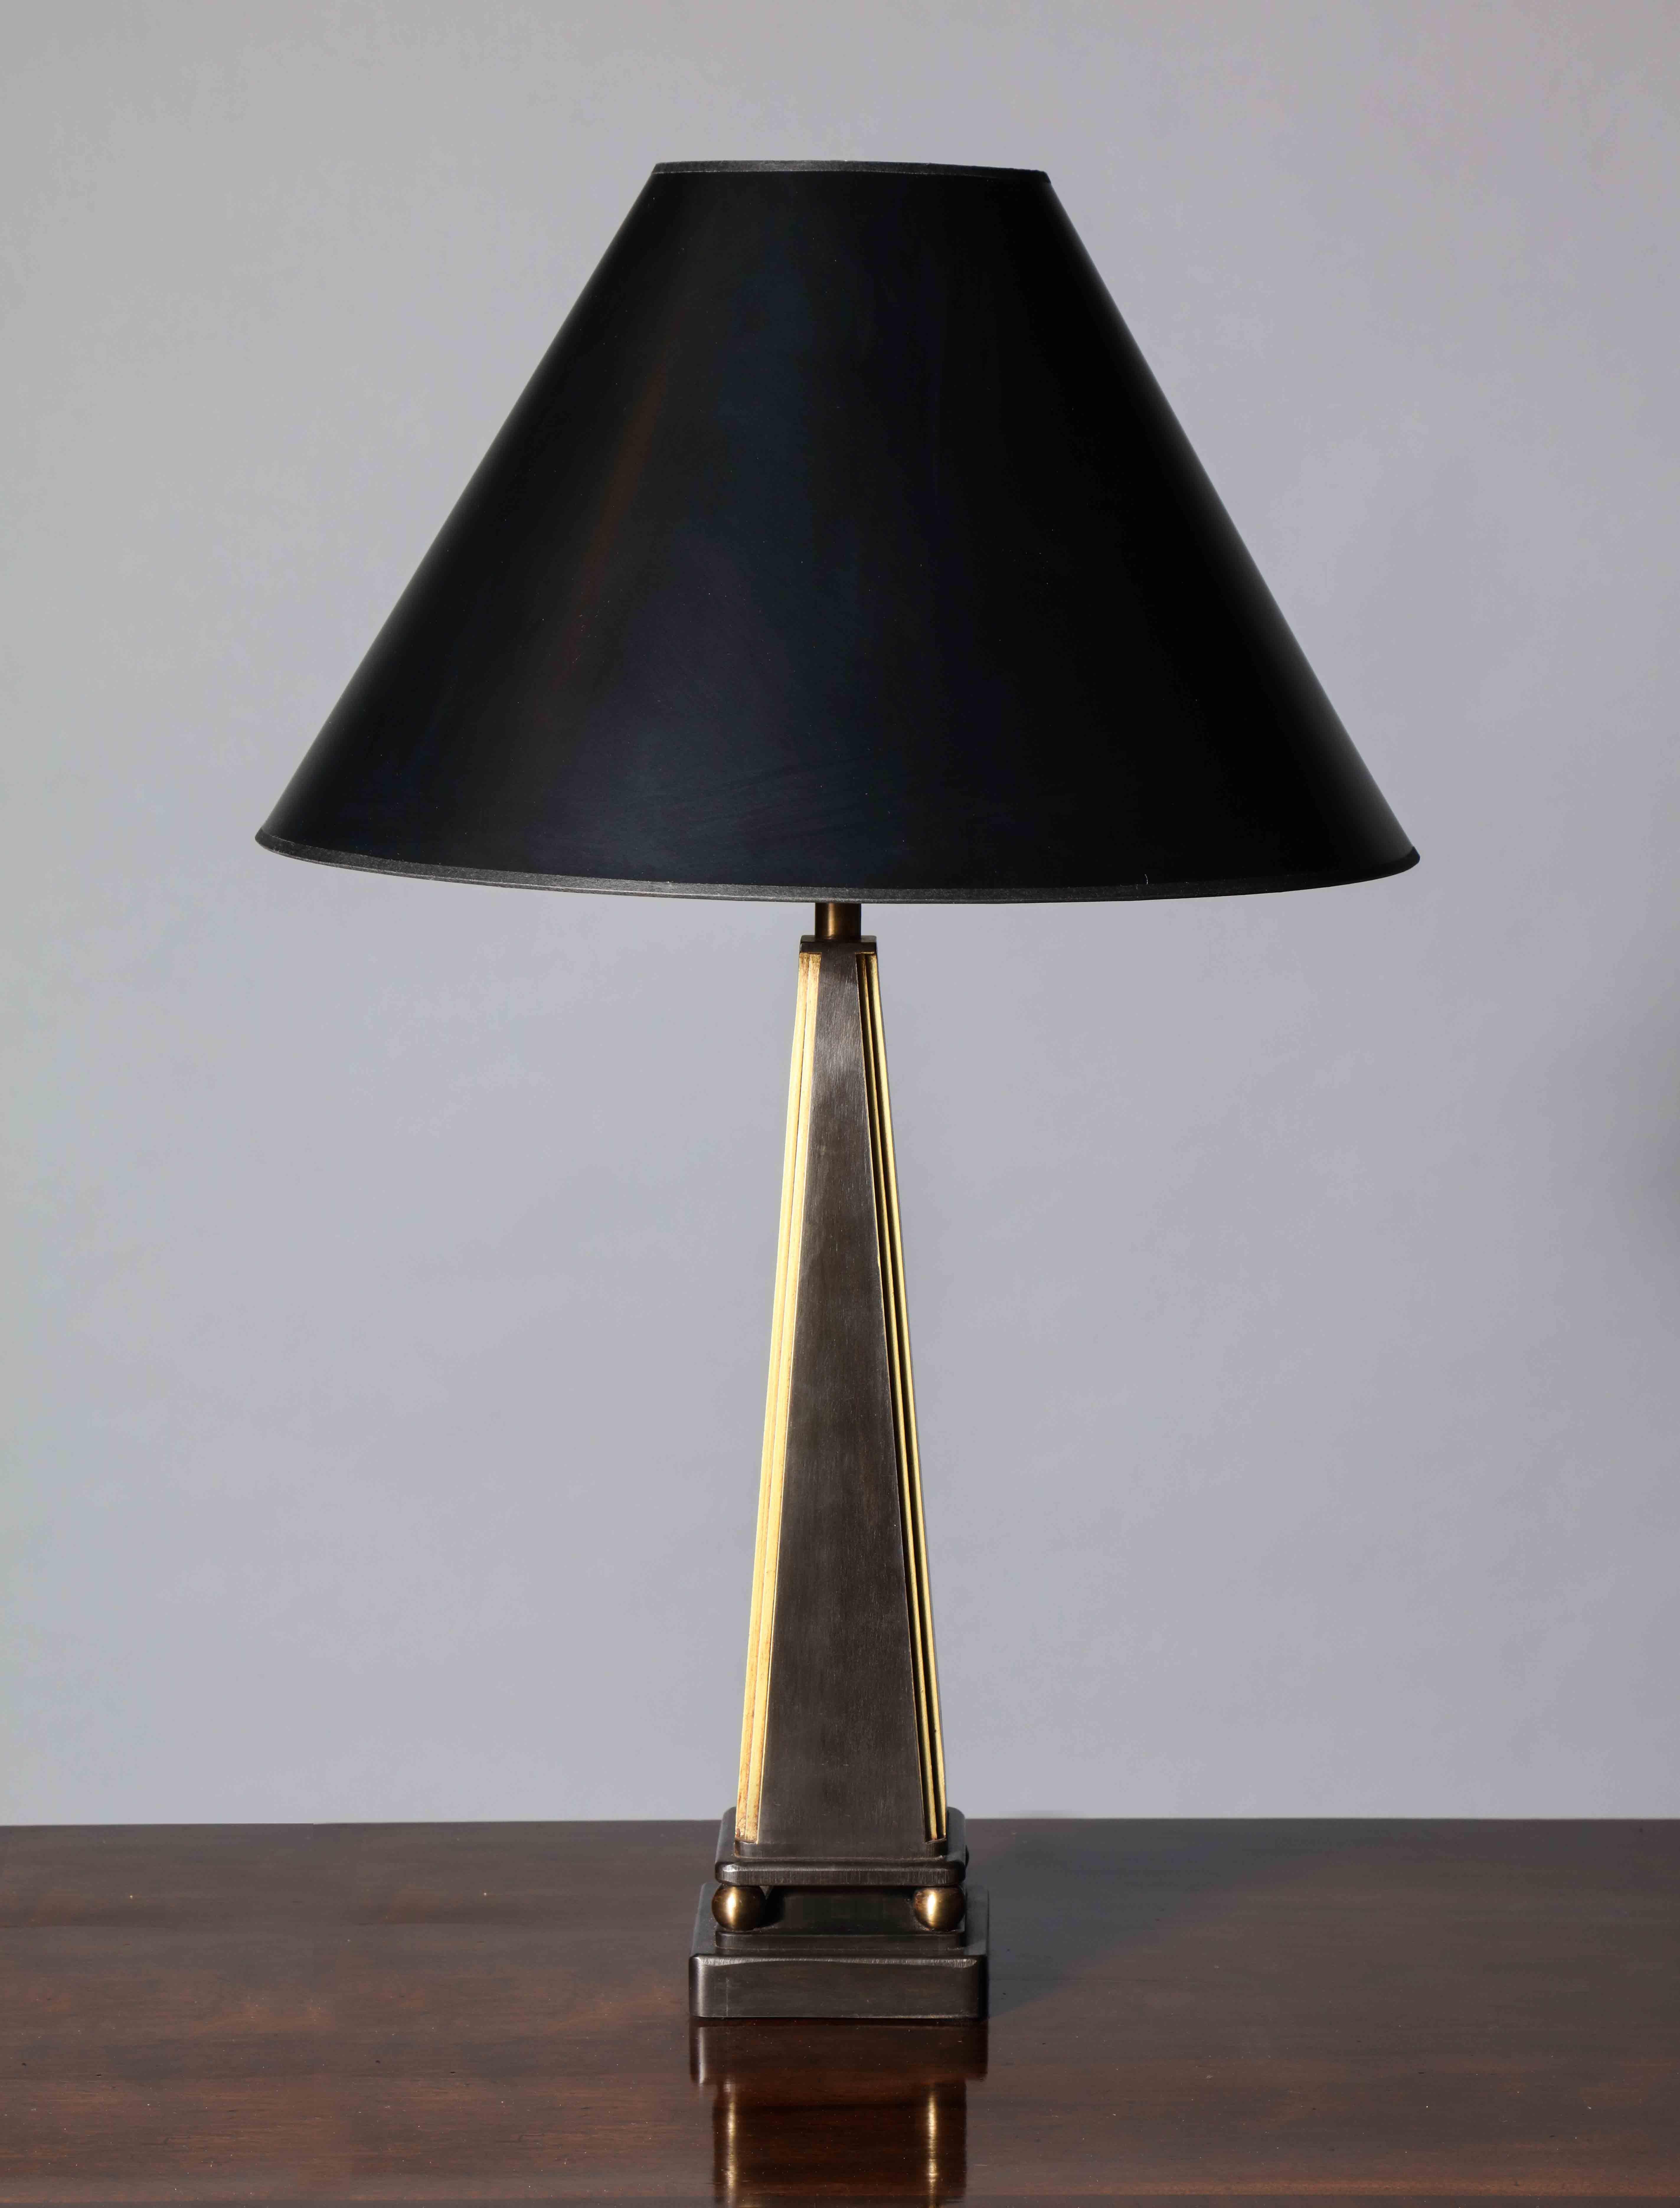 A handmade steel table lamp in pyramid form – raised on ball feet and set on a square plinth. The design references the French neoclassical aesthetic of the 1930s through late 1940s.

The brass detailing has been lightly antiqued while the main